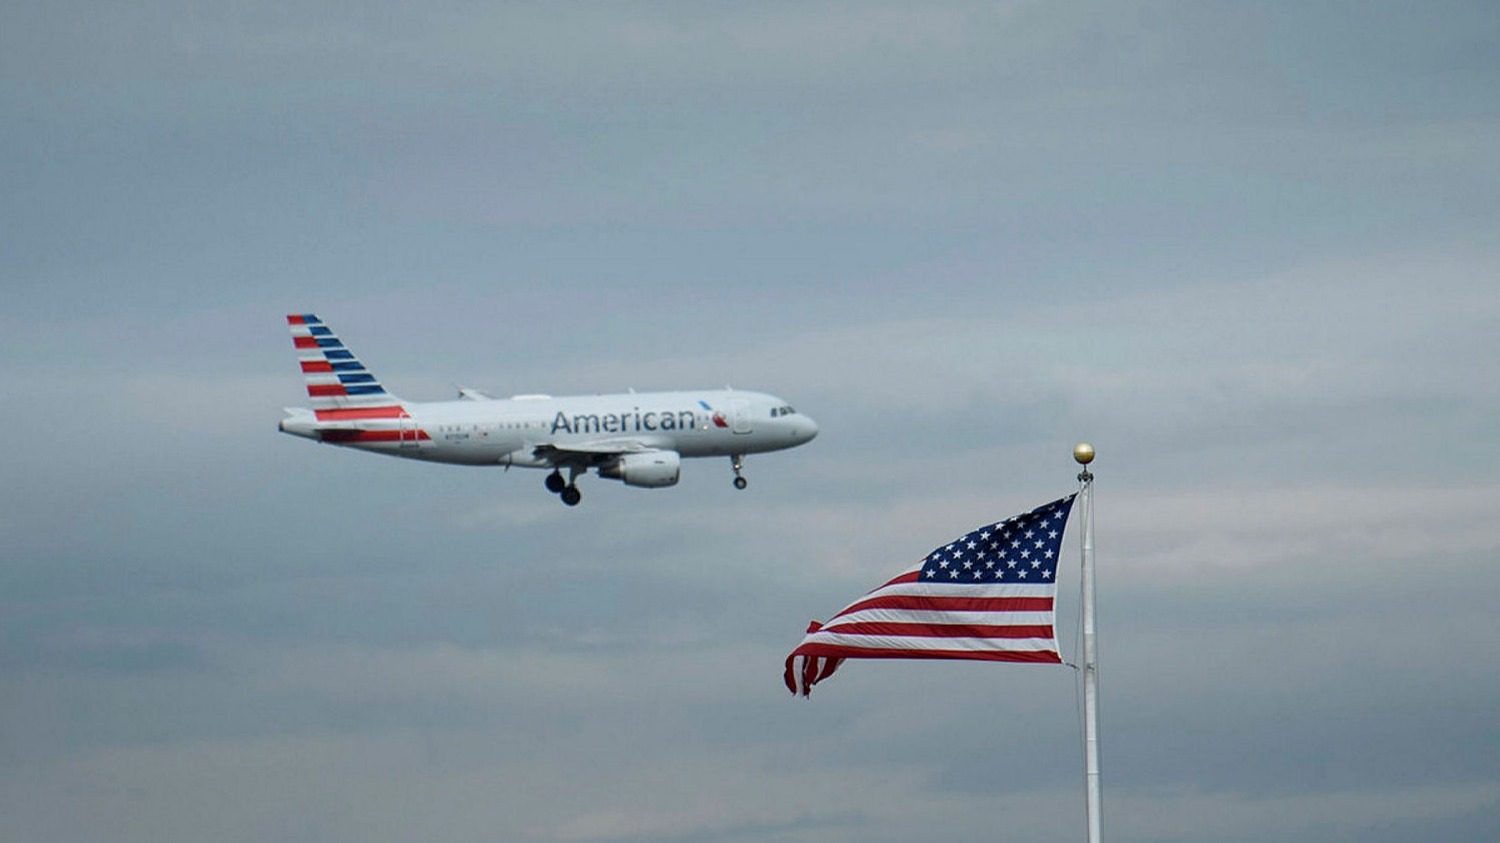 AA airliner in the air and American flag